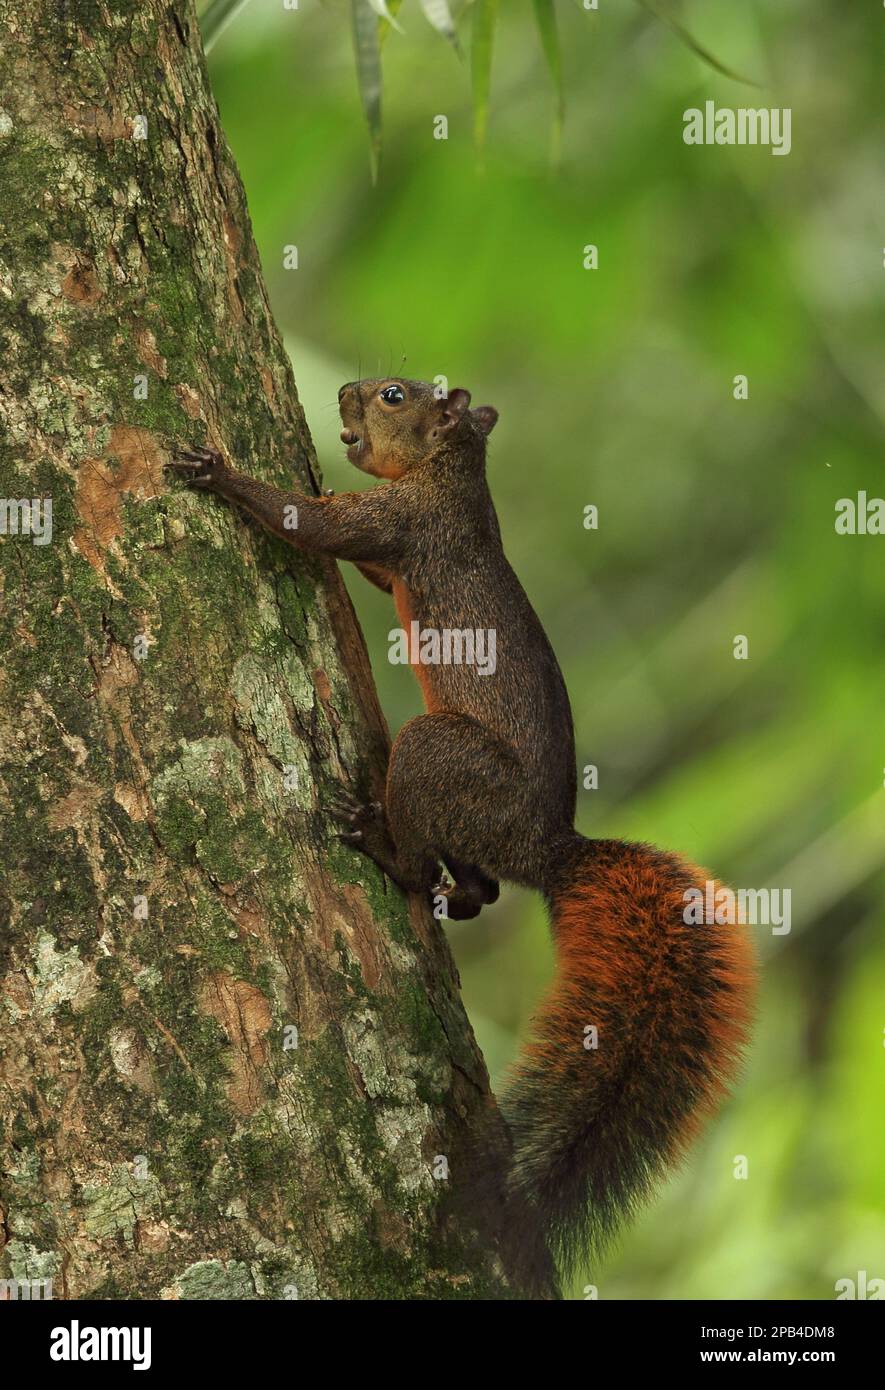 Red-tailed squirrel (Sciurus granatensis), rodents, mammals, animals, Red-tailed squirrel adult, with nut in mouth, climbing tree trunk, Canopy Tower, Stock Photo